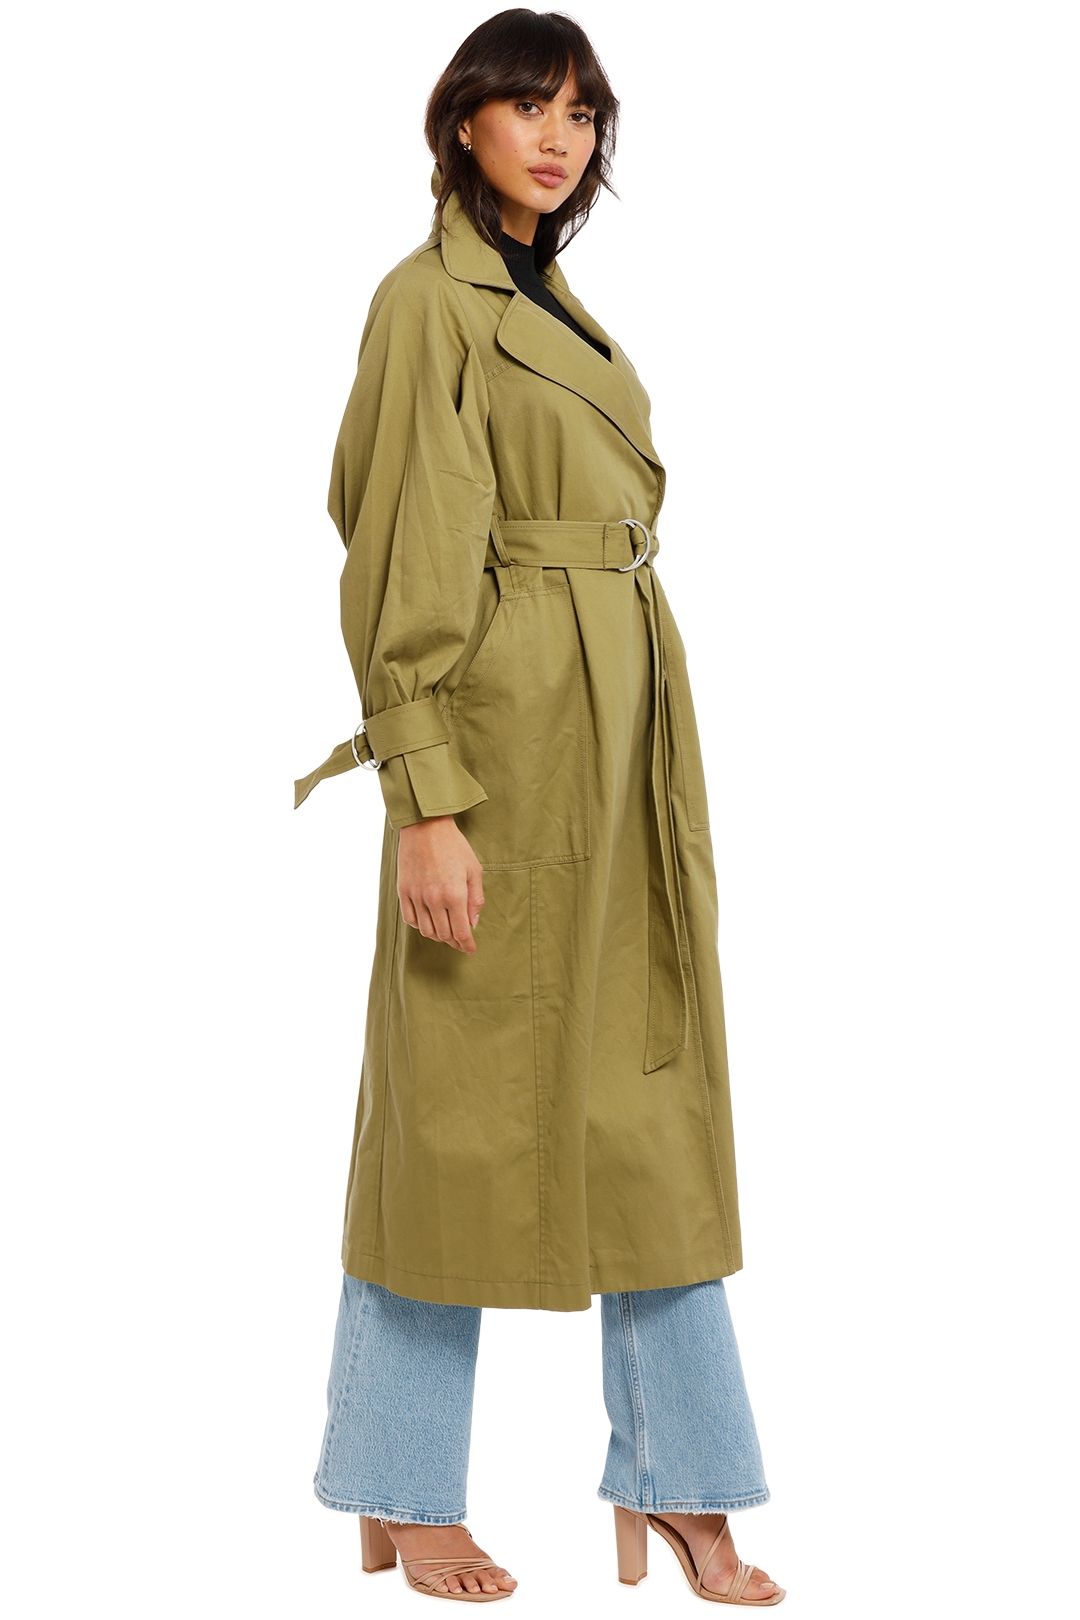 Magali Pascal Stevie Trench Olive green